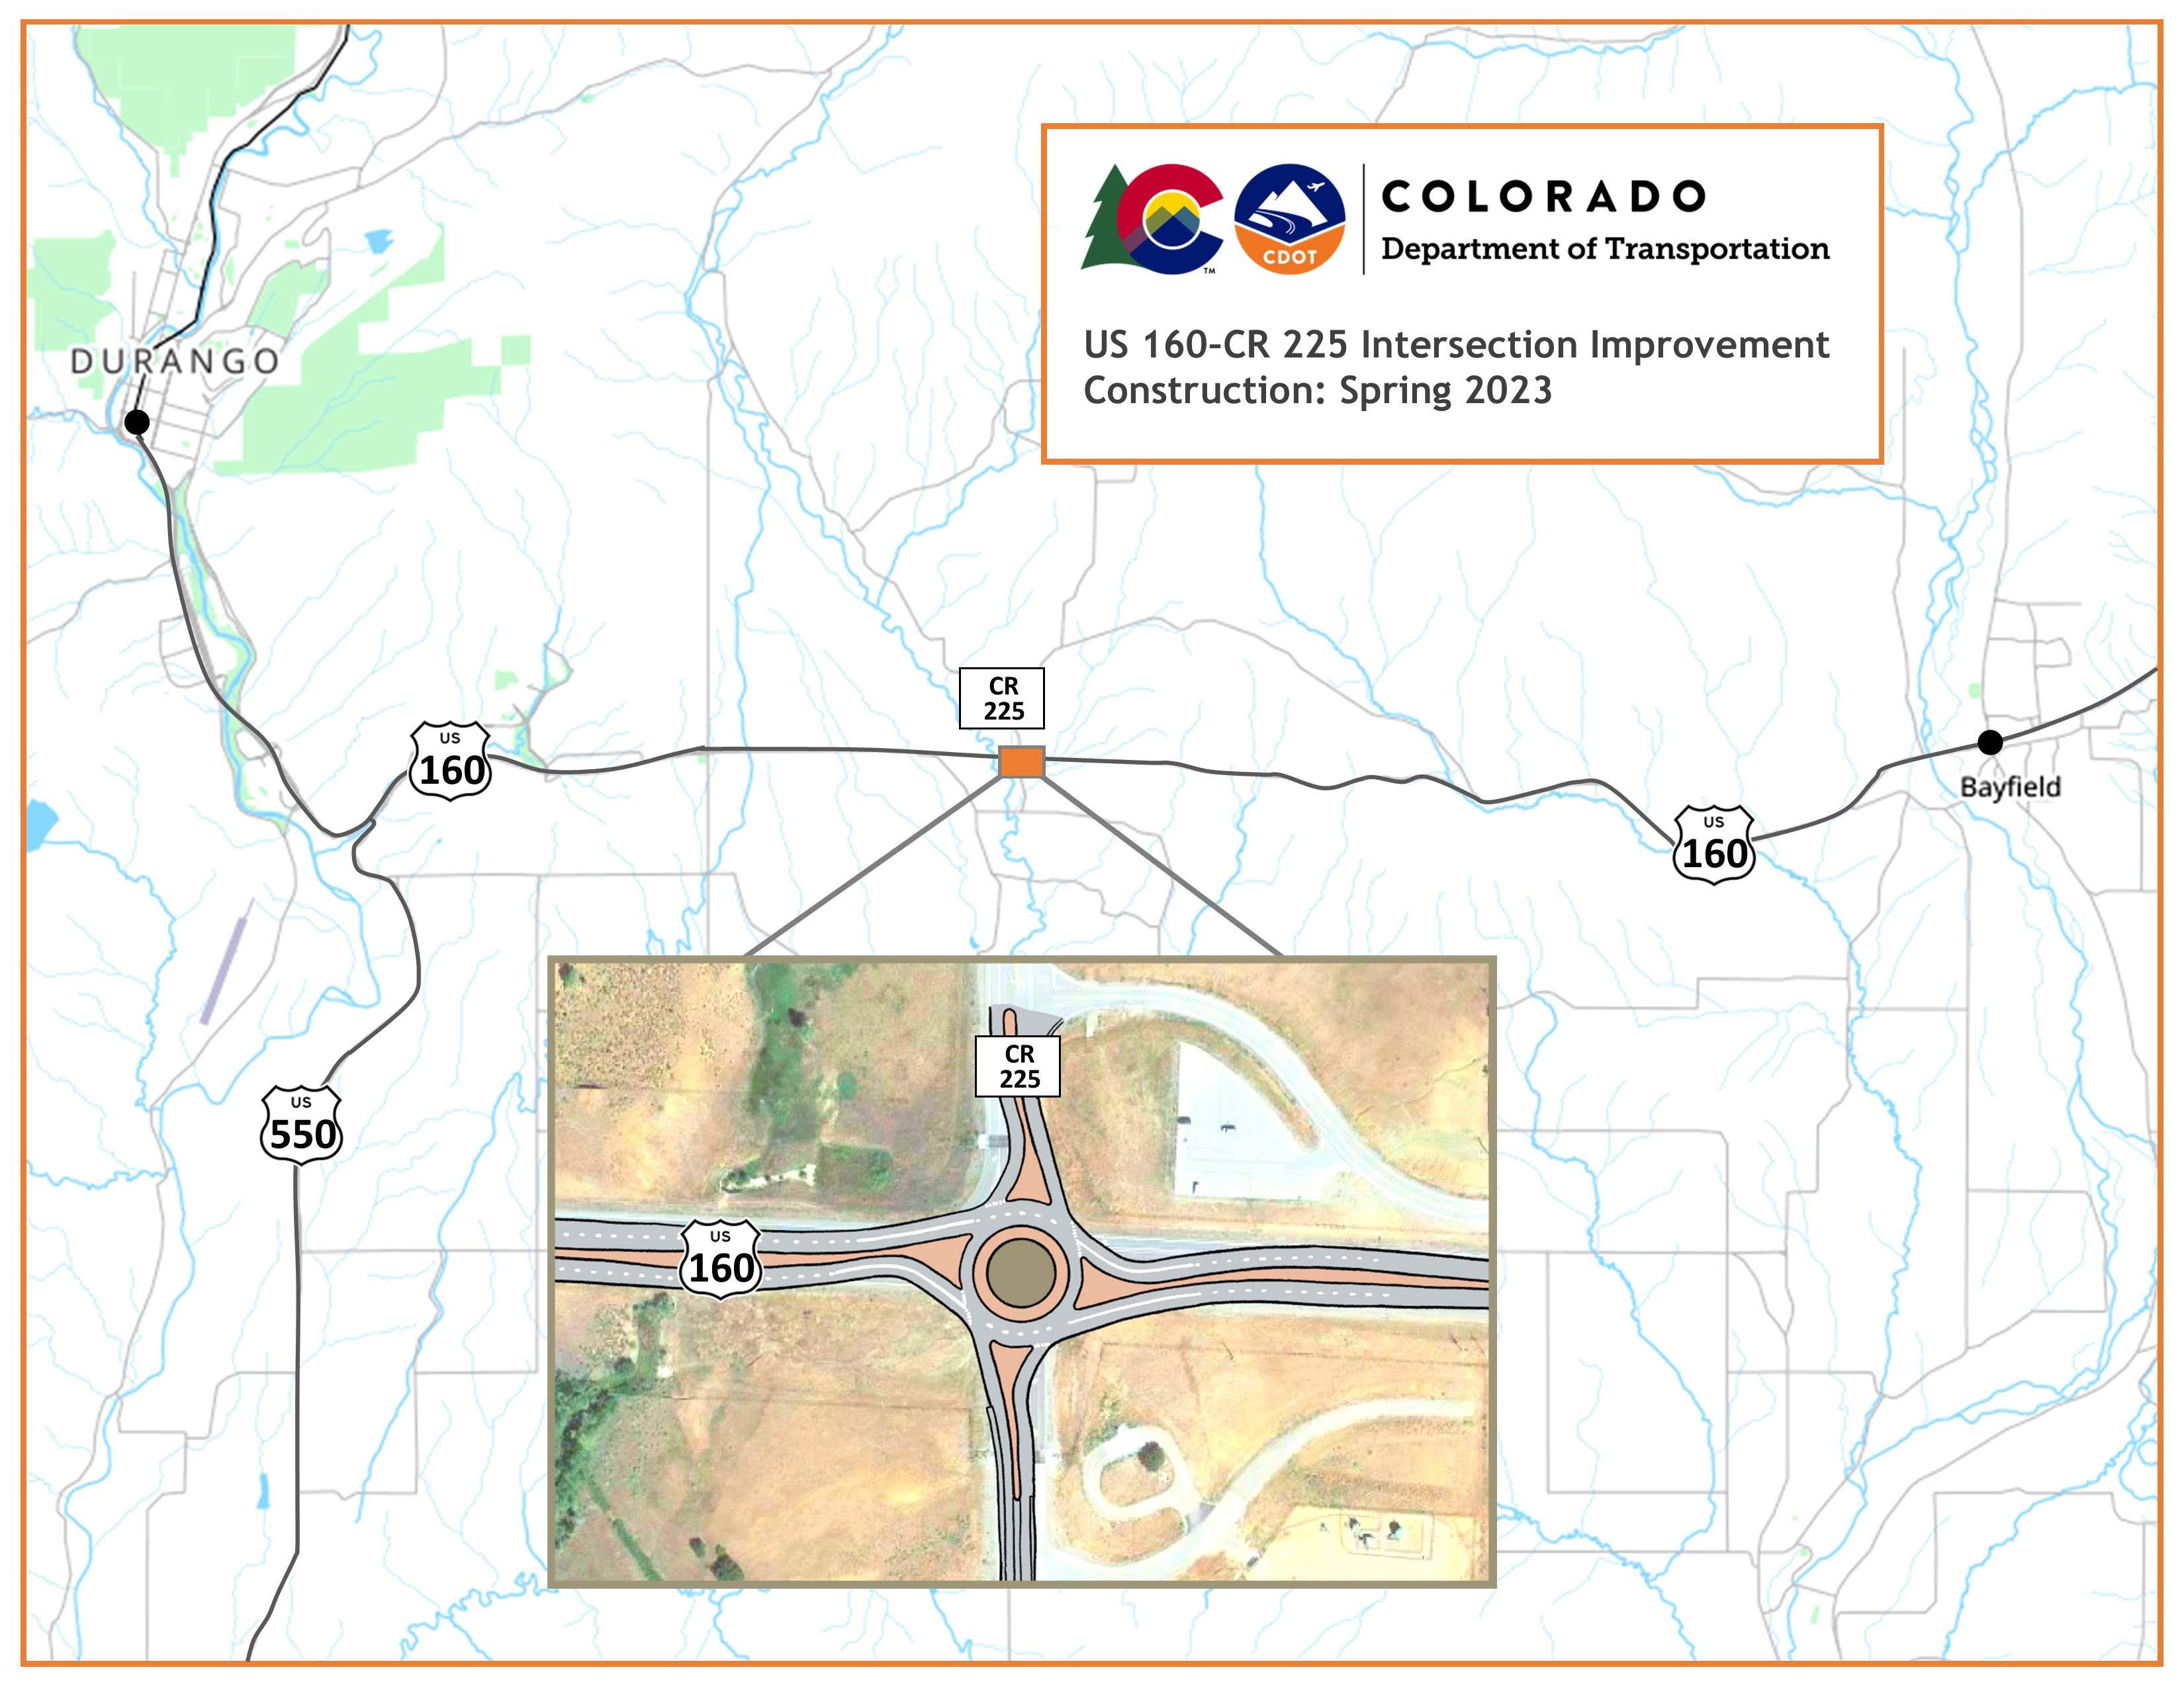 US 160-CR 225 Intersection Improvement Project map for Spring 2023 detail image